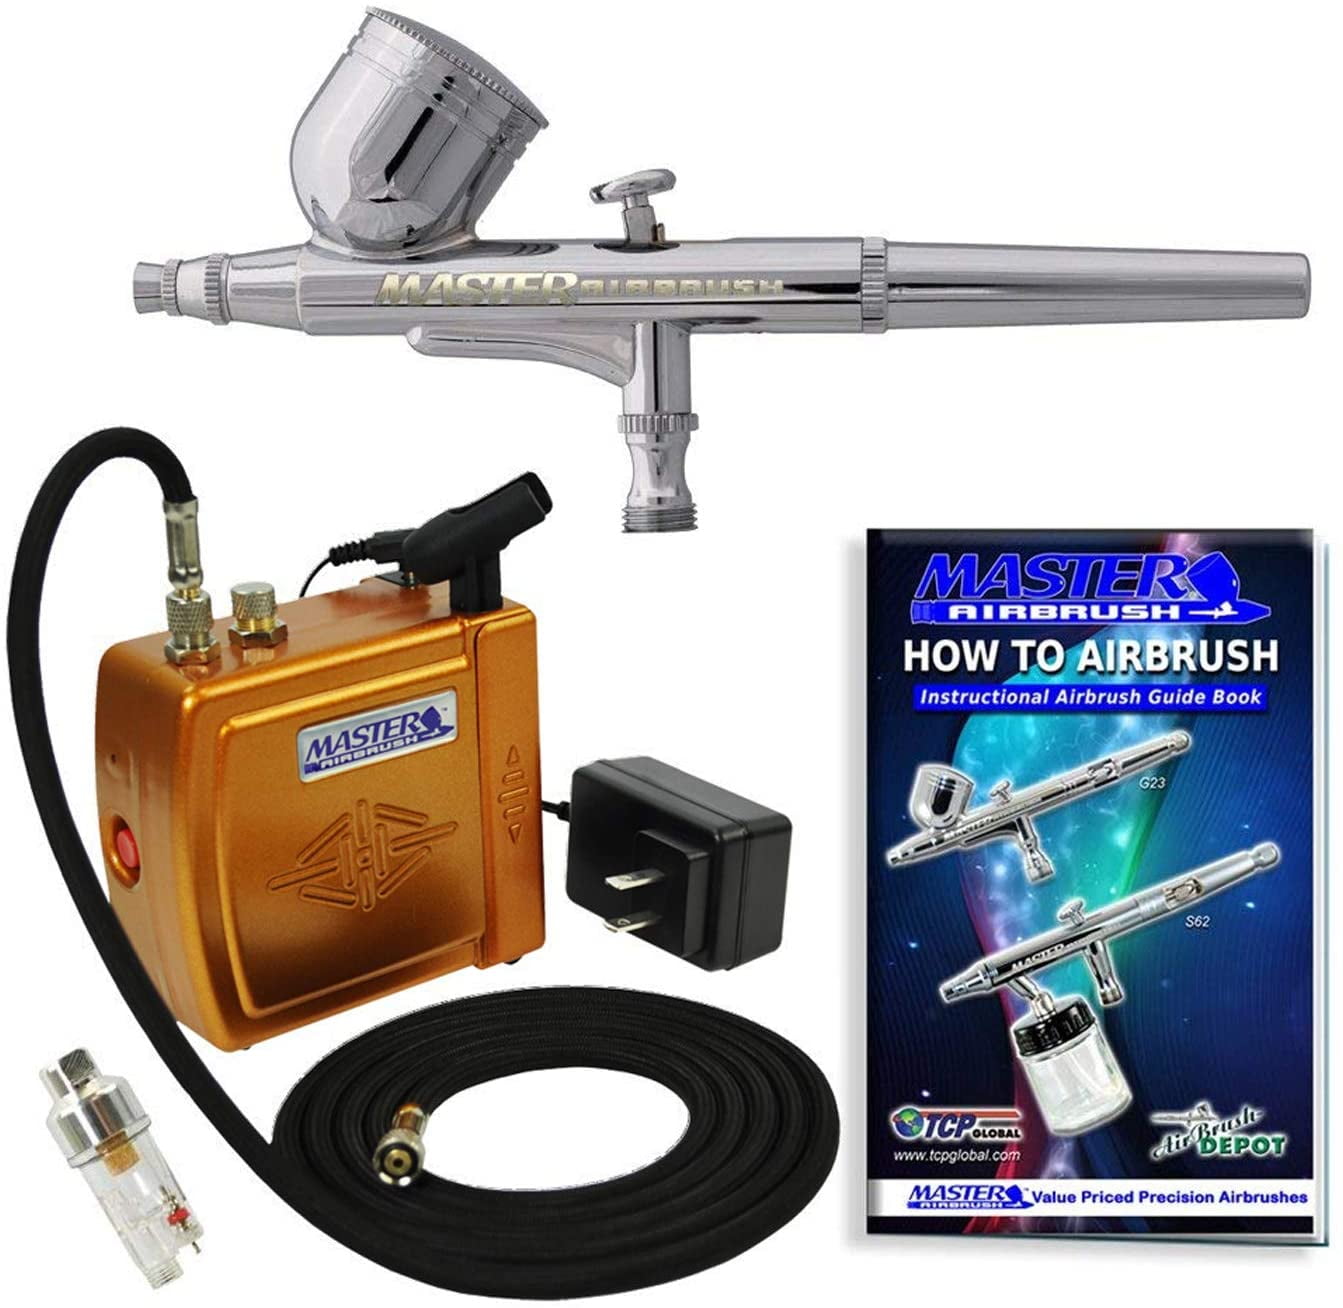 Avhrit Cordless Airbrush Compressor Kit for Painting with Compressor, 32PSI